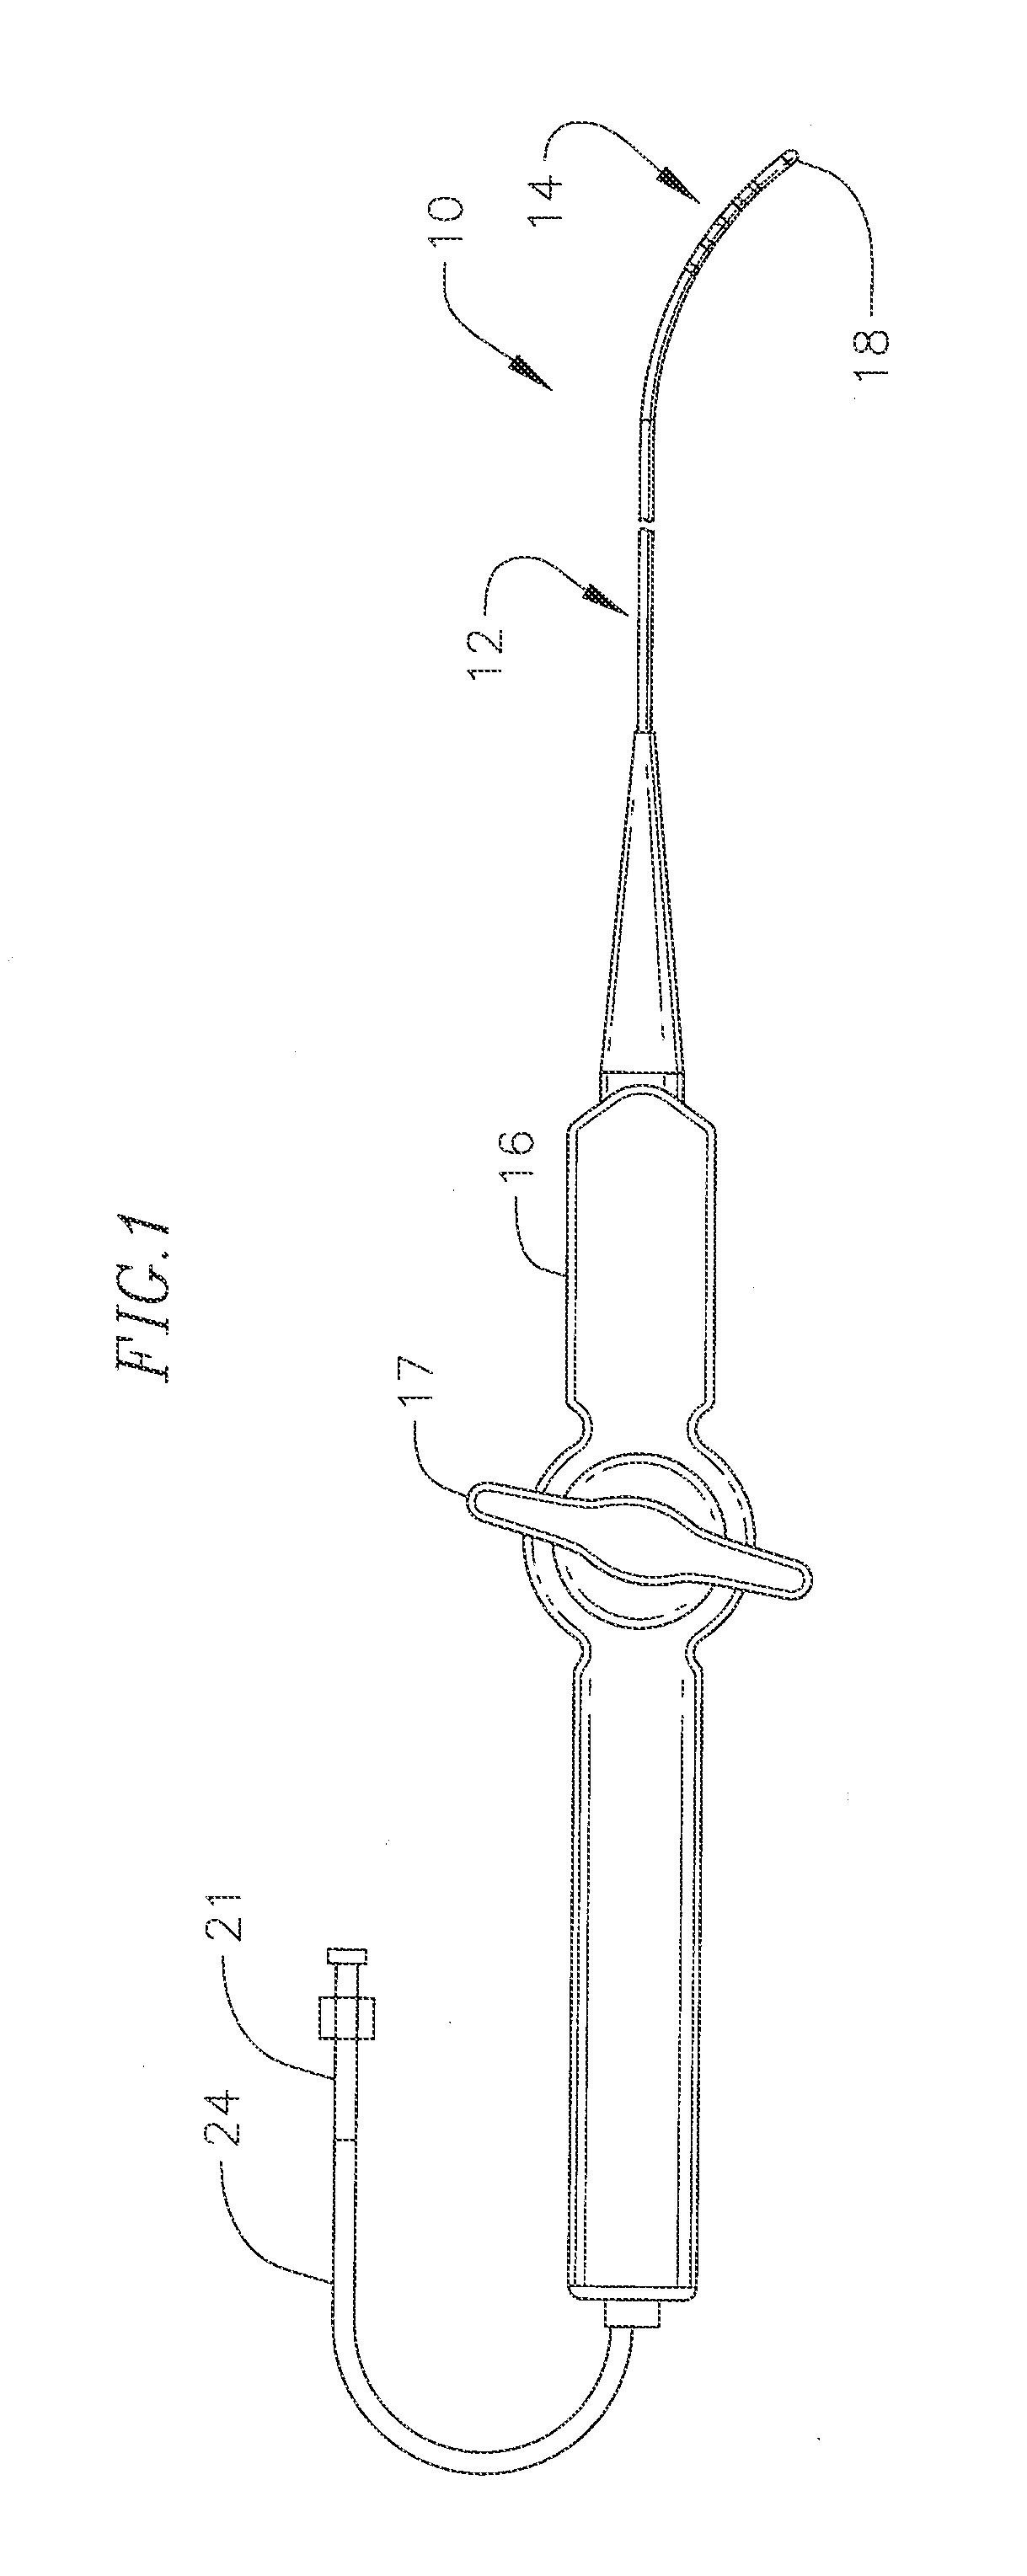 Catheter with biased planar deflection